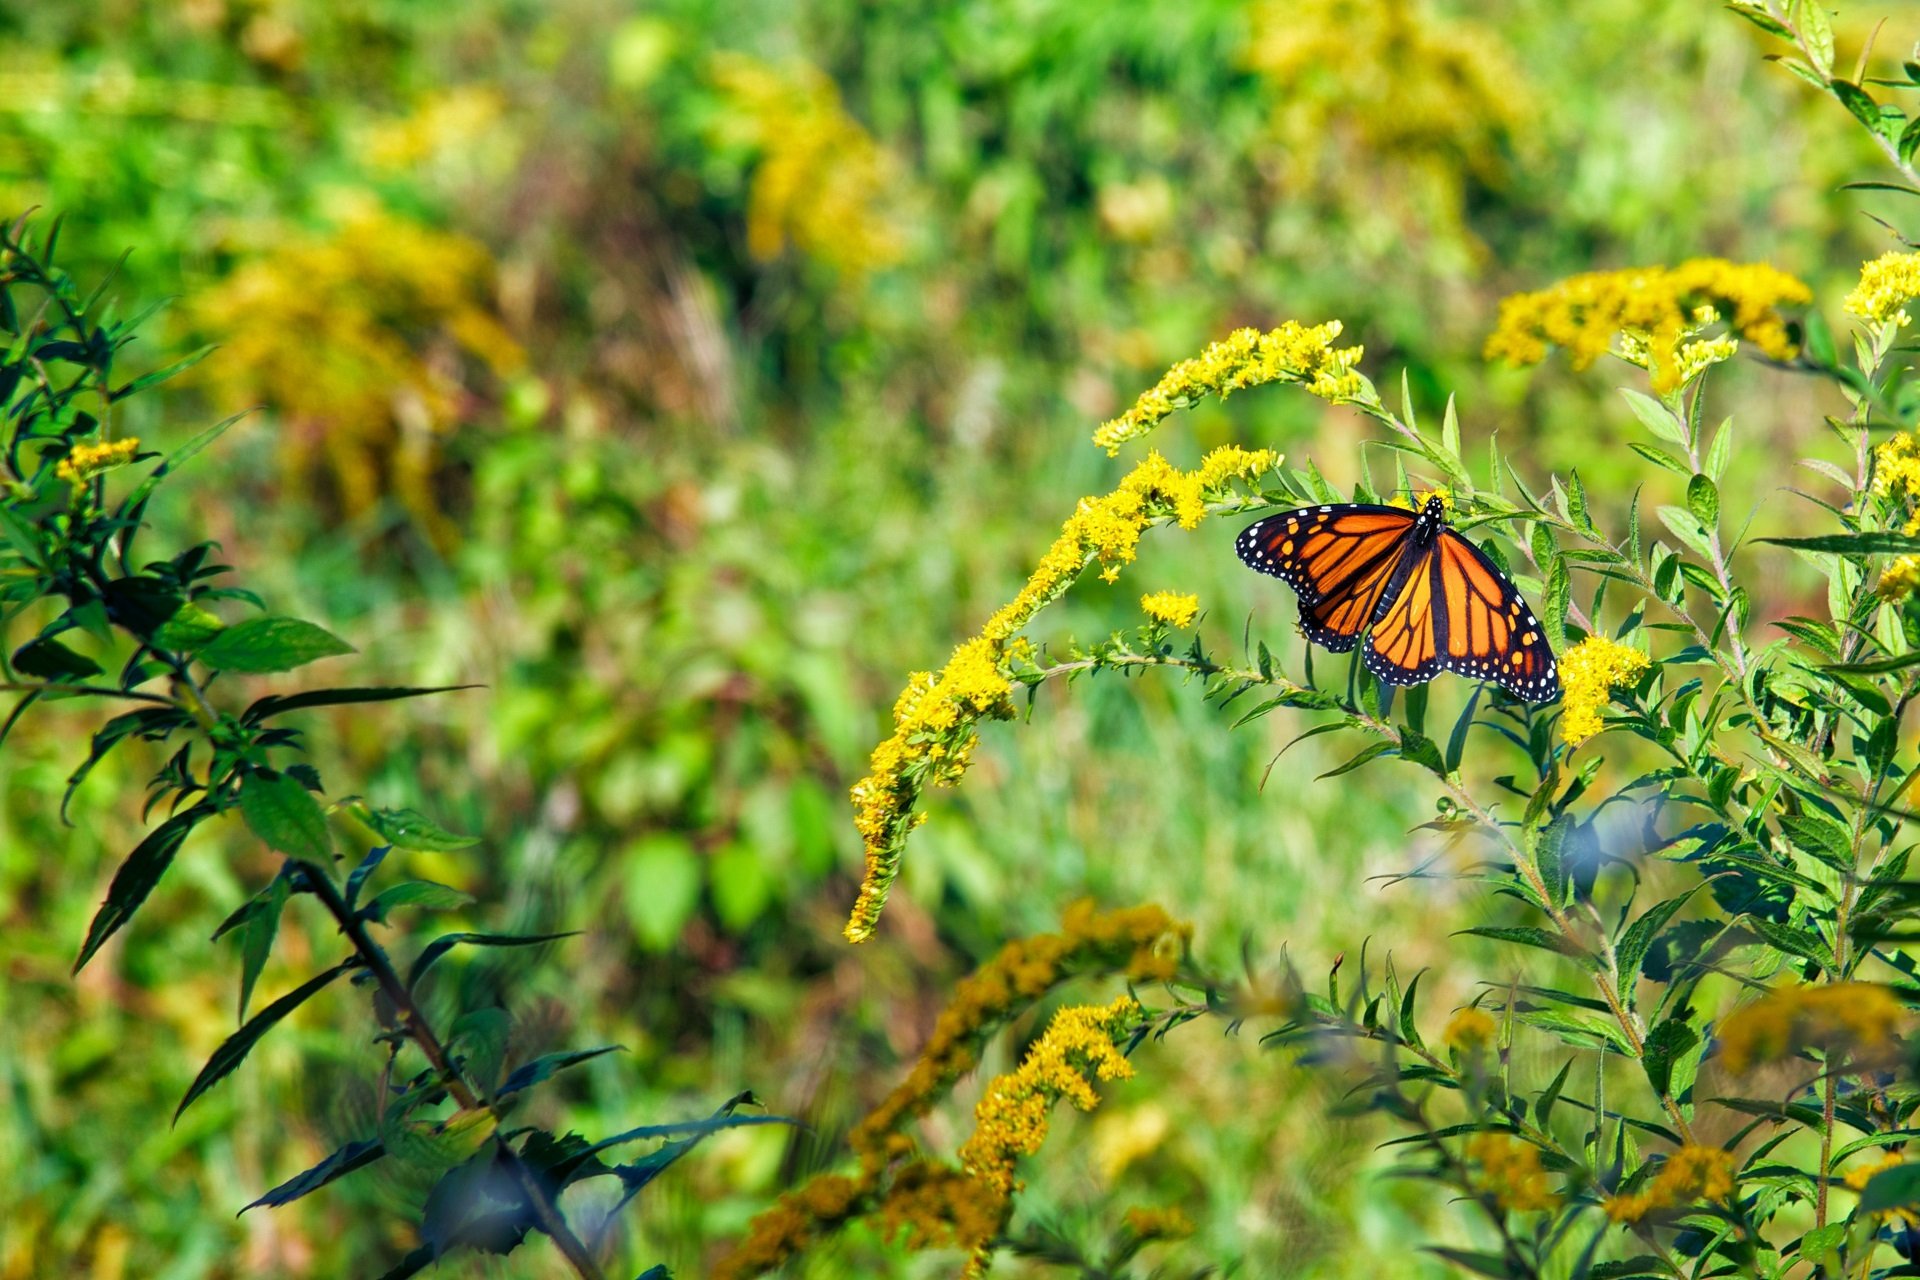 A Monarch butterfly rests amid goldenrod at Wachusett Meadow Wildlife Sanctuary.